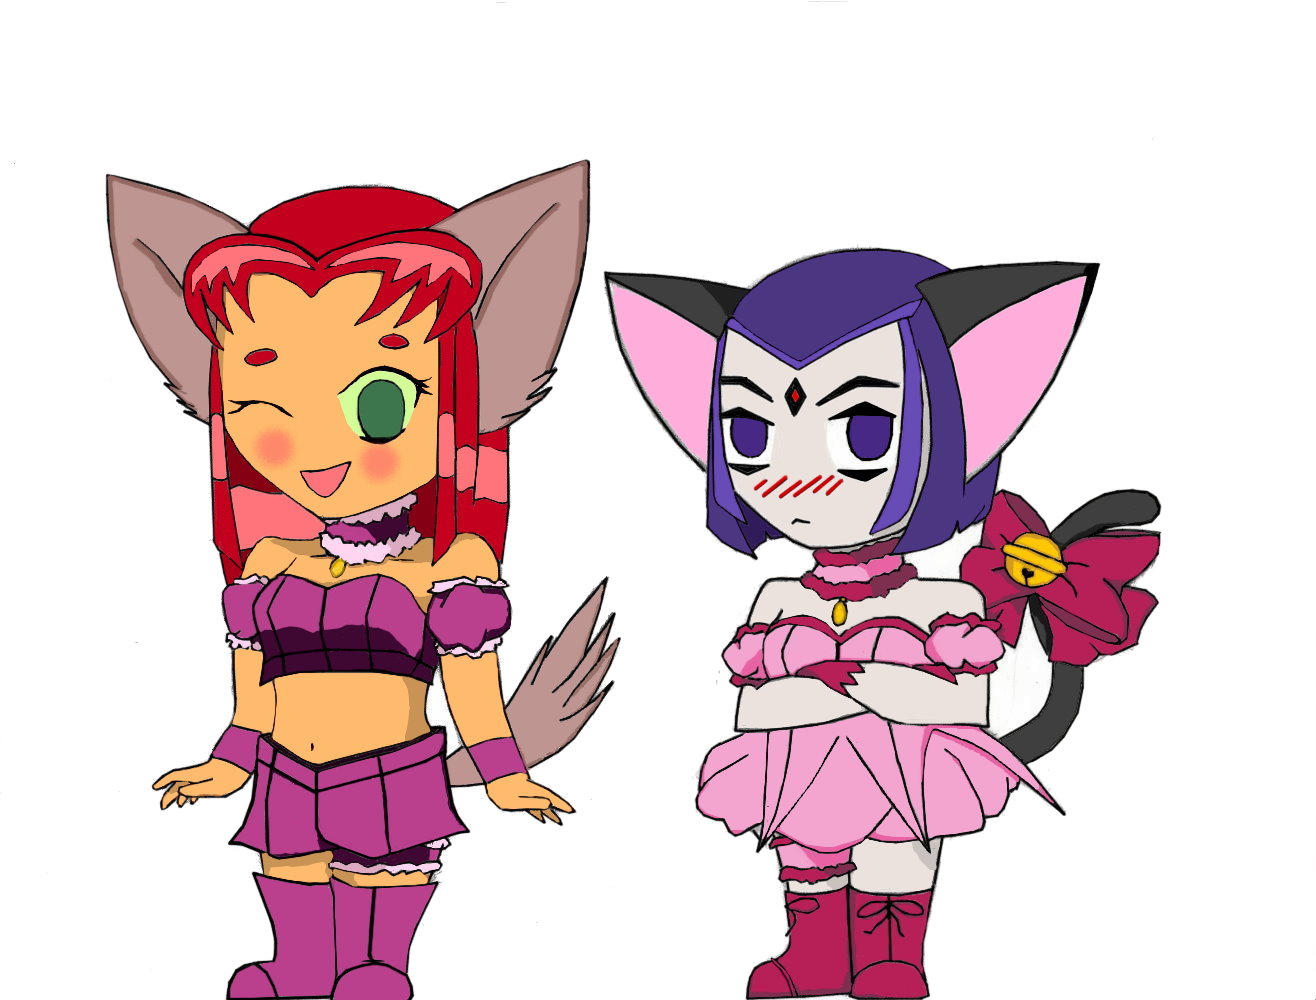 Mew Starfire and Mew Raven by AngelKittyChan